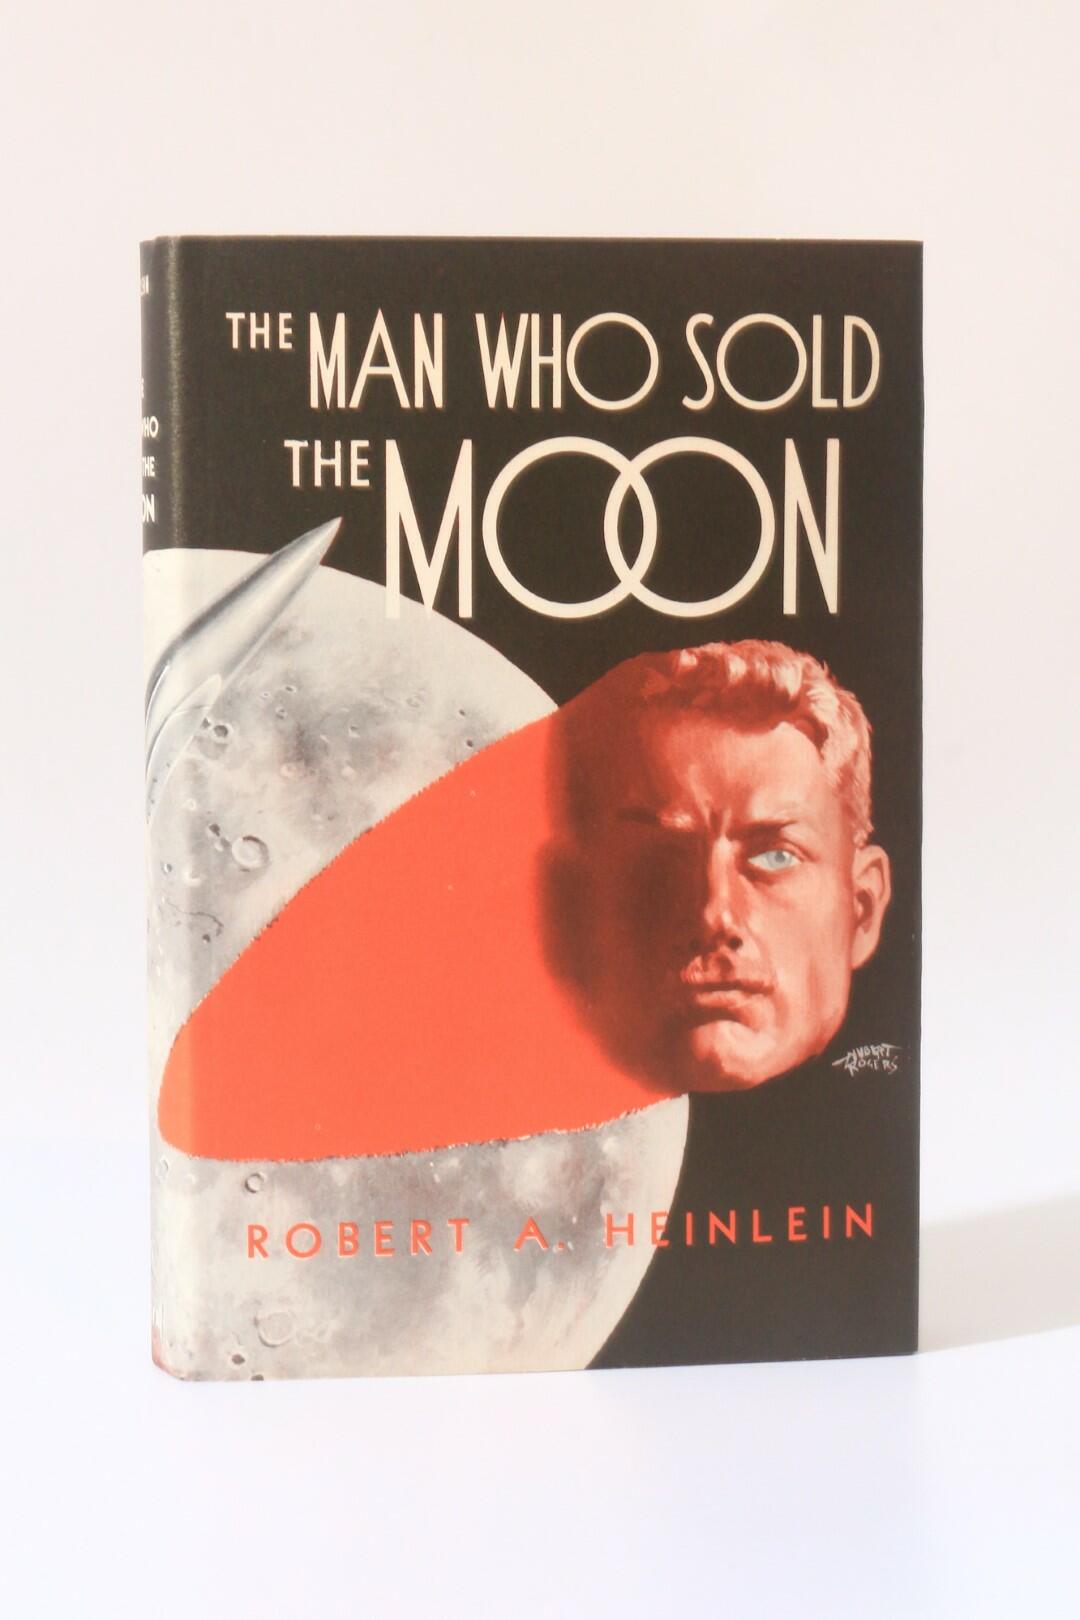 Robert A. Heinlein - The Man Who Sold the Moon - Shasta, 1950, First Edition.